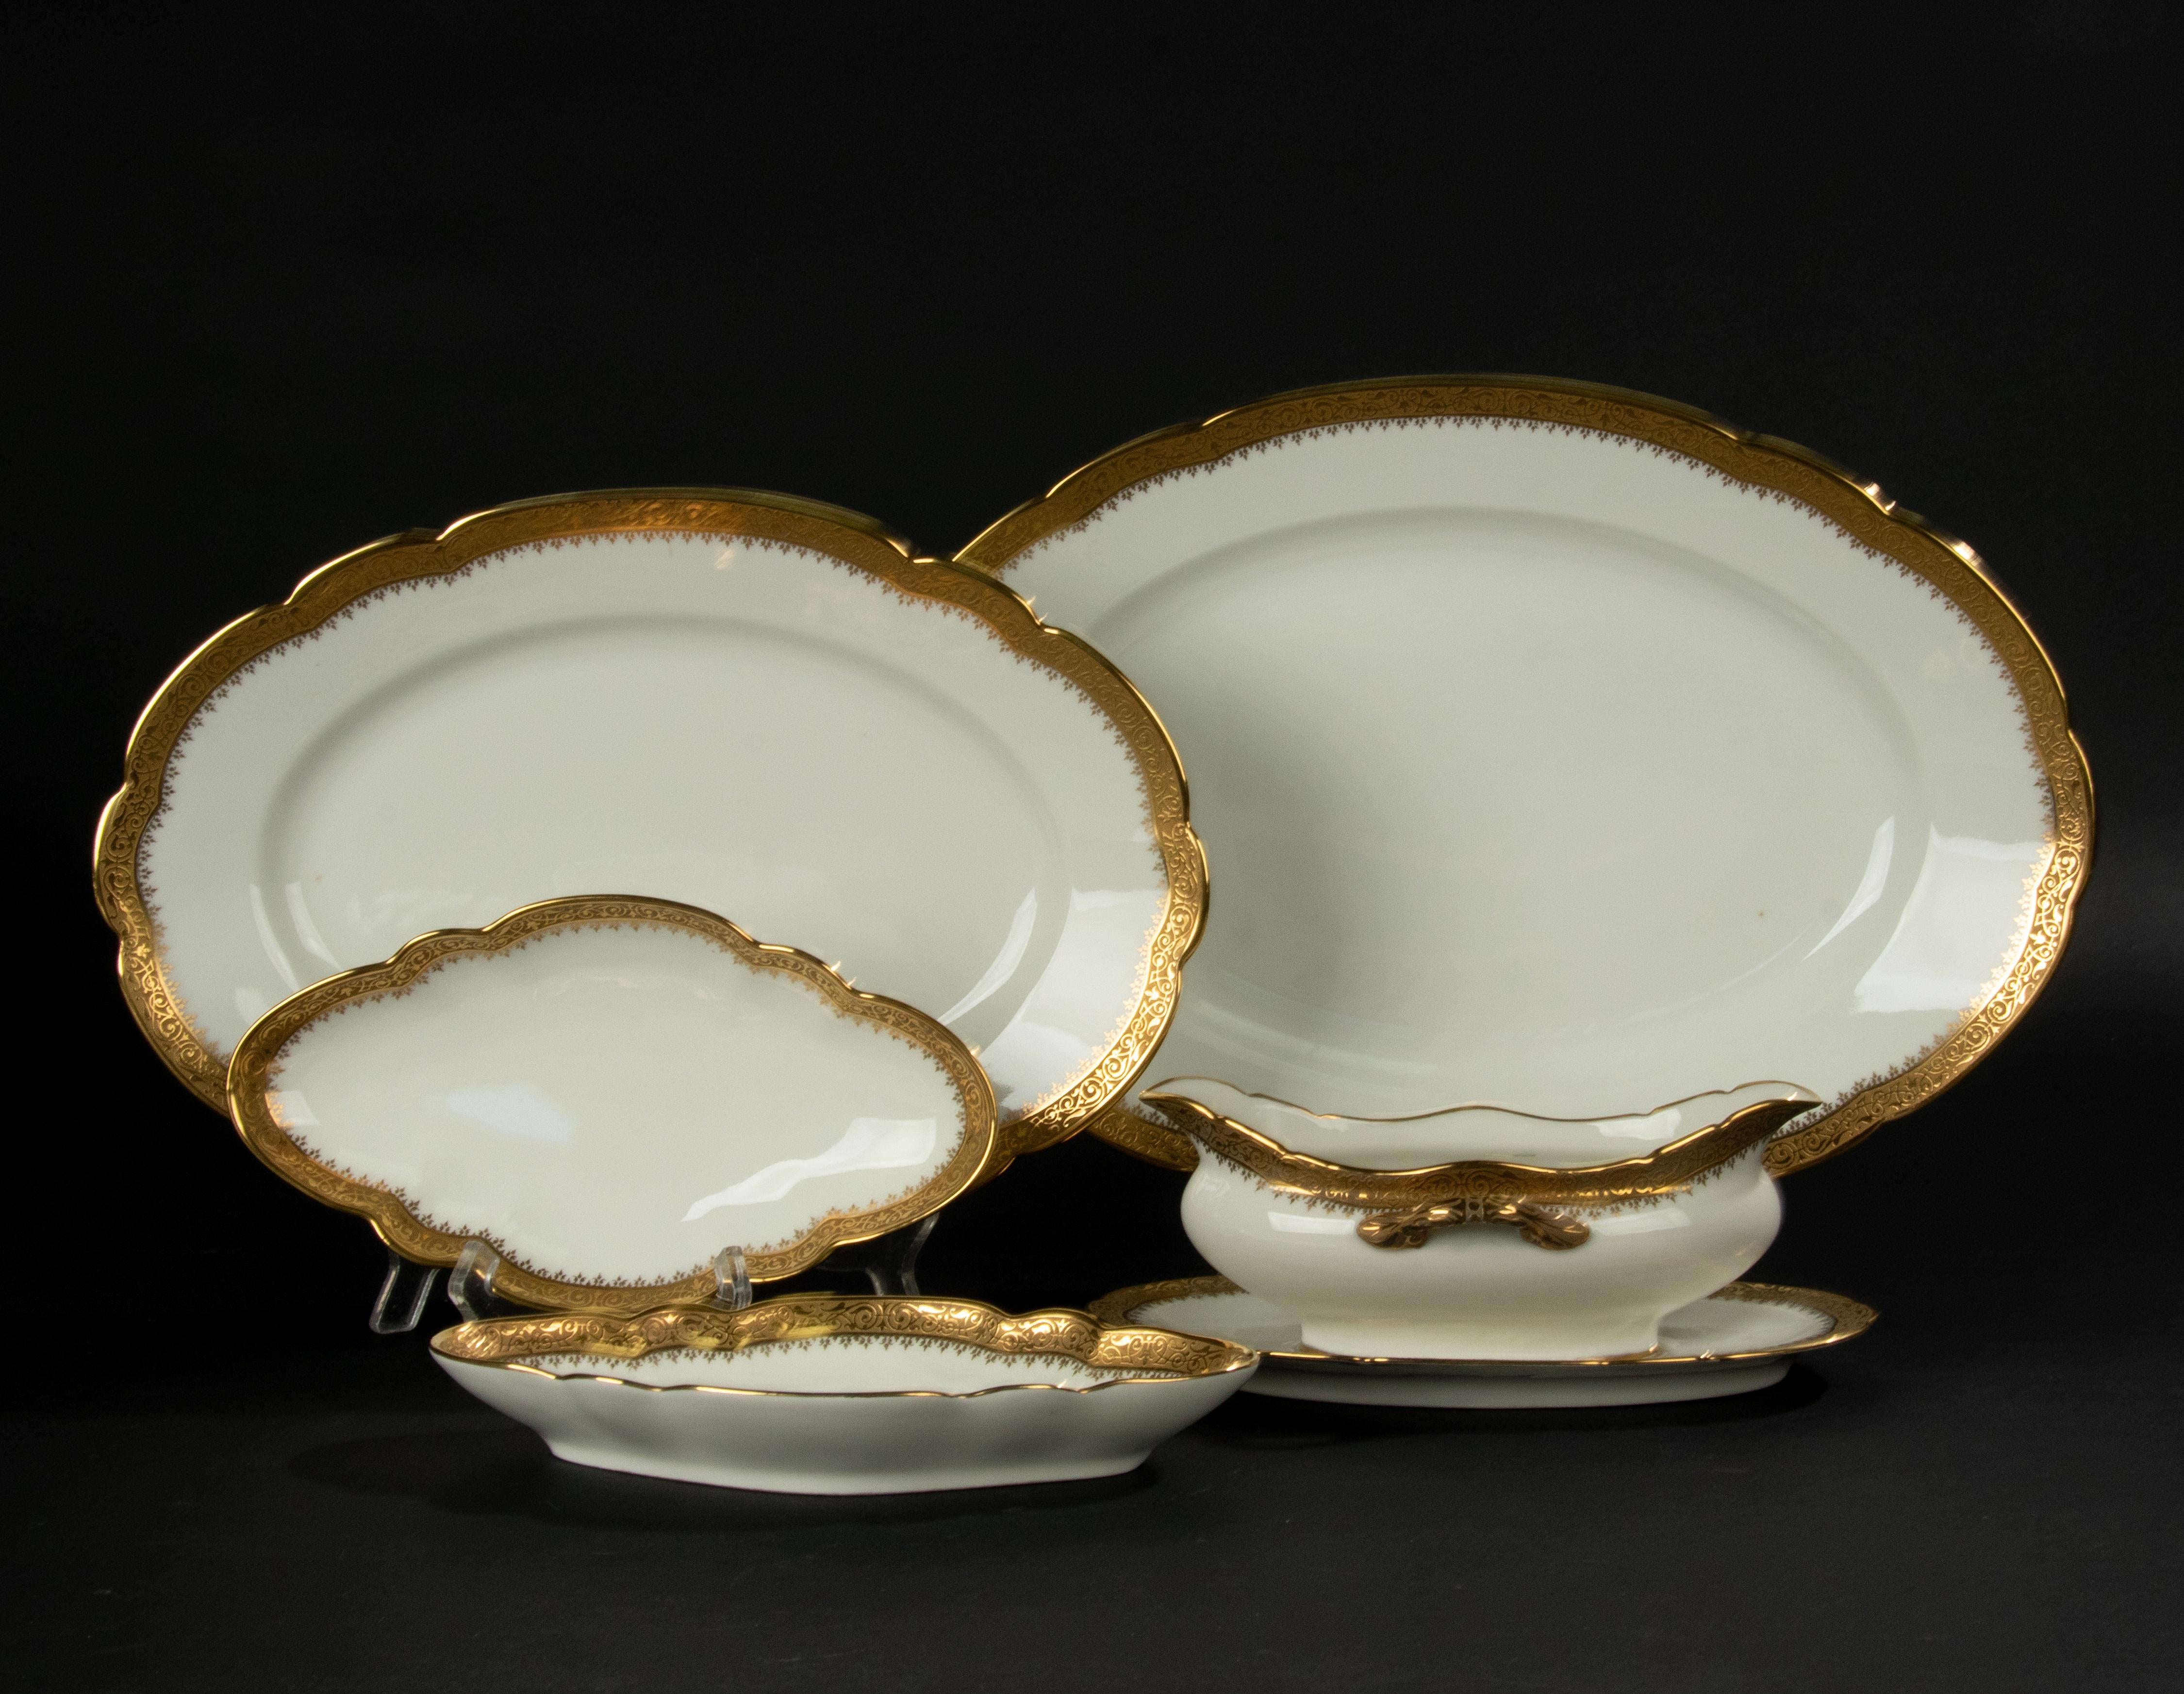 51-Piece Set Porcelain Tableware for 12 Persons - Limoges Incrusted Gold Trims 9